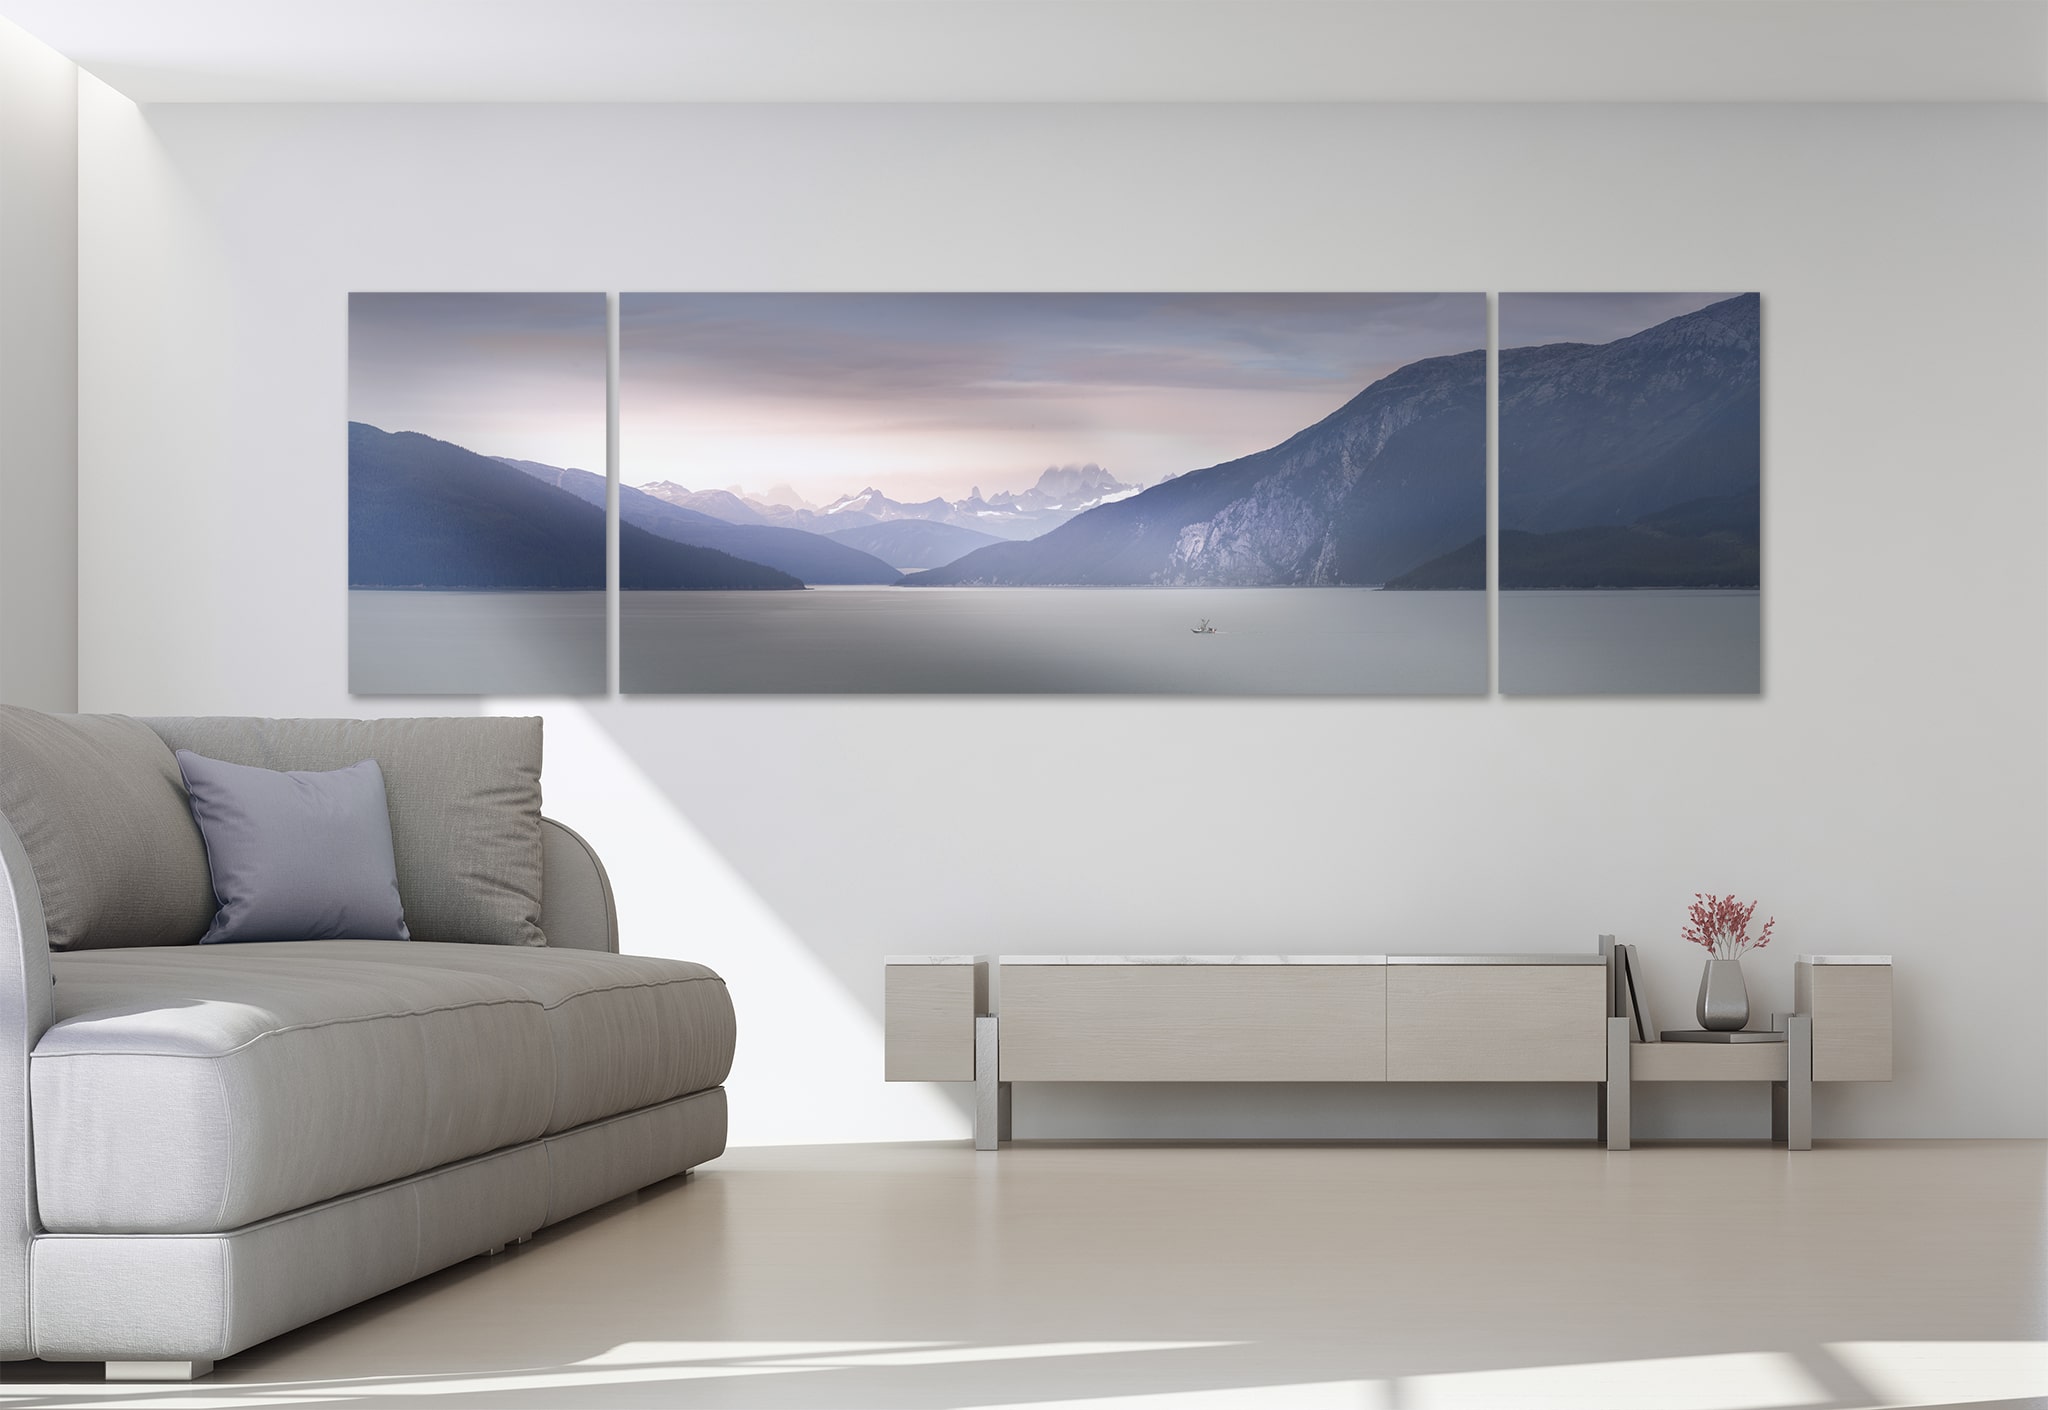 Extra Large Panorama Artworks for Your Wall - Franklin Arts